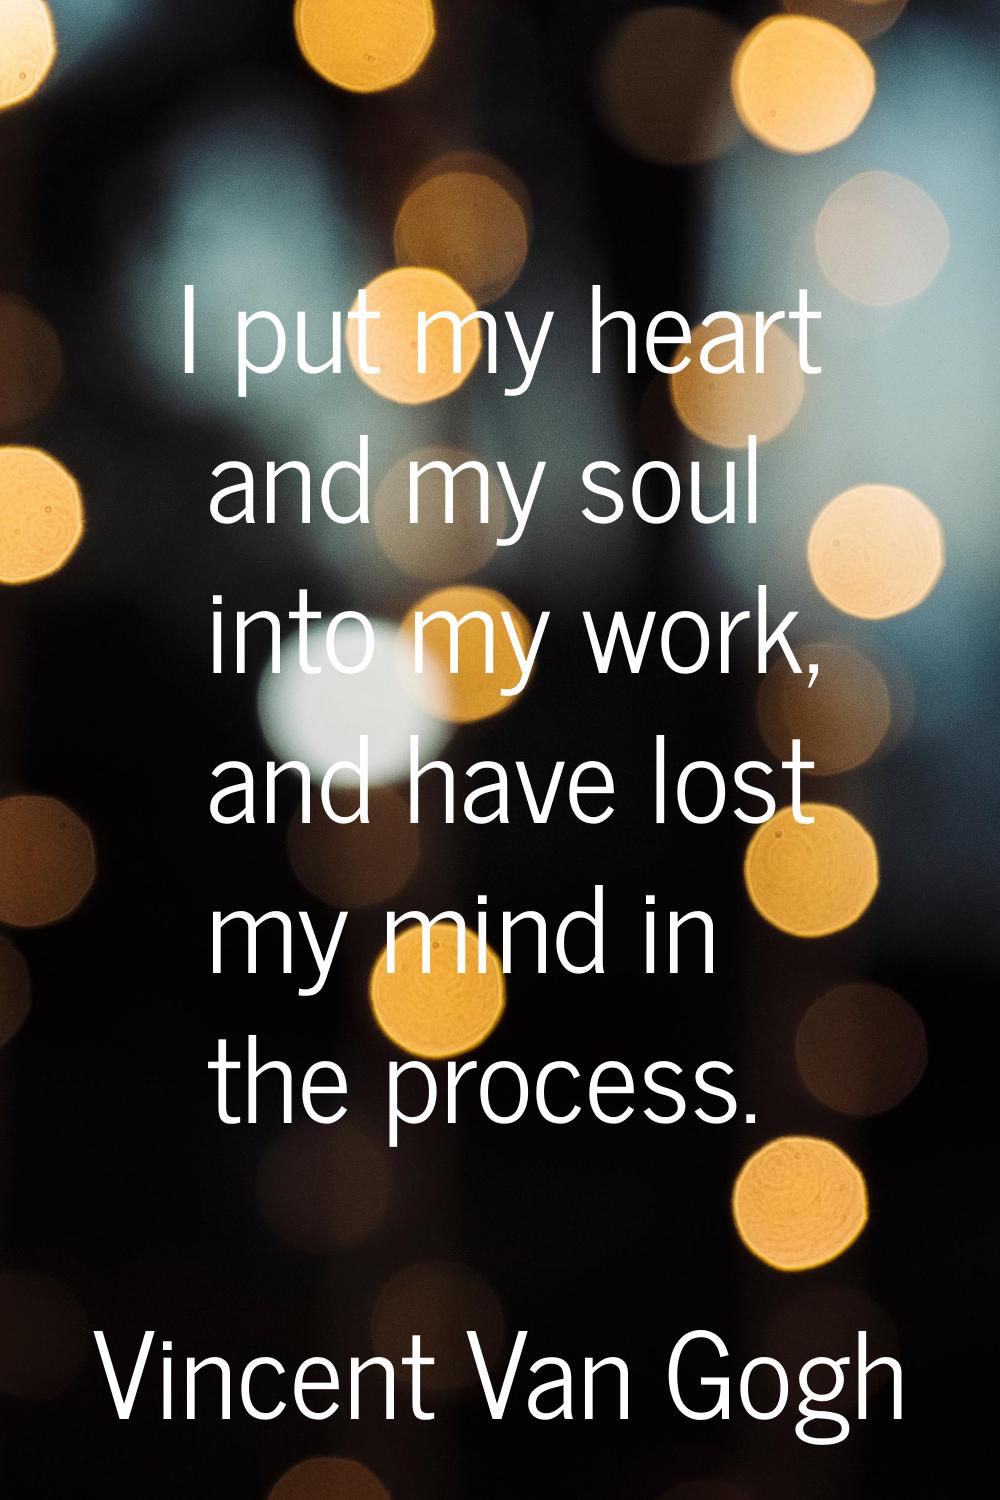 I put my heart and my soul into my work, and have lost my mind in the process.